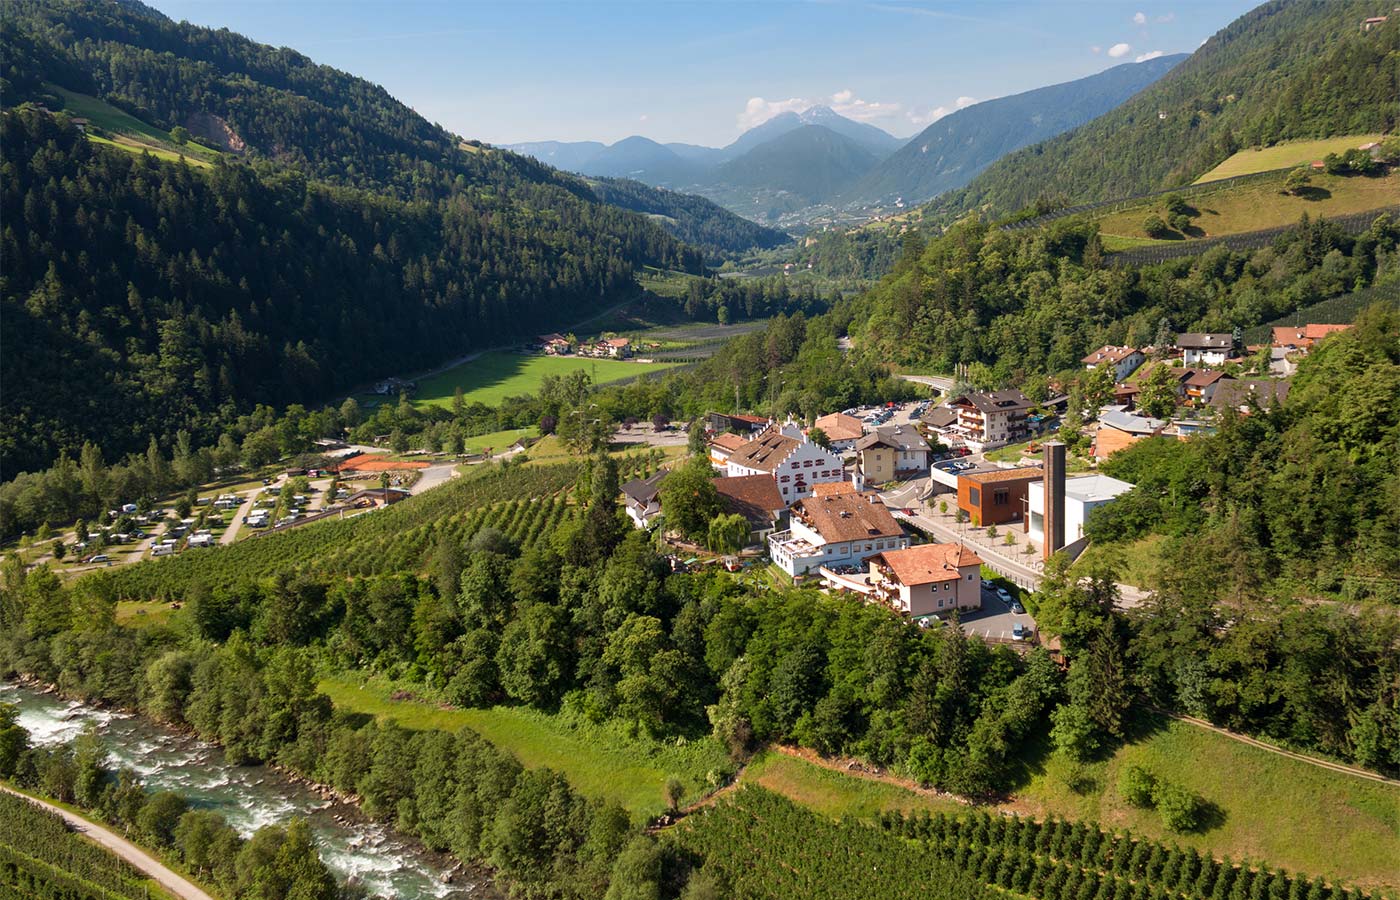 Hotel Alpenhof is located in Saltusio, in the southern Val Passiria